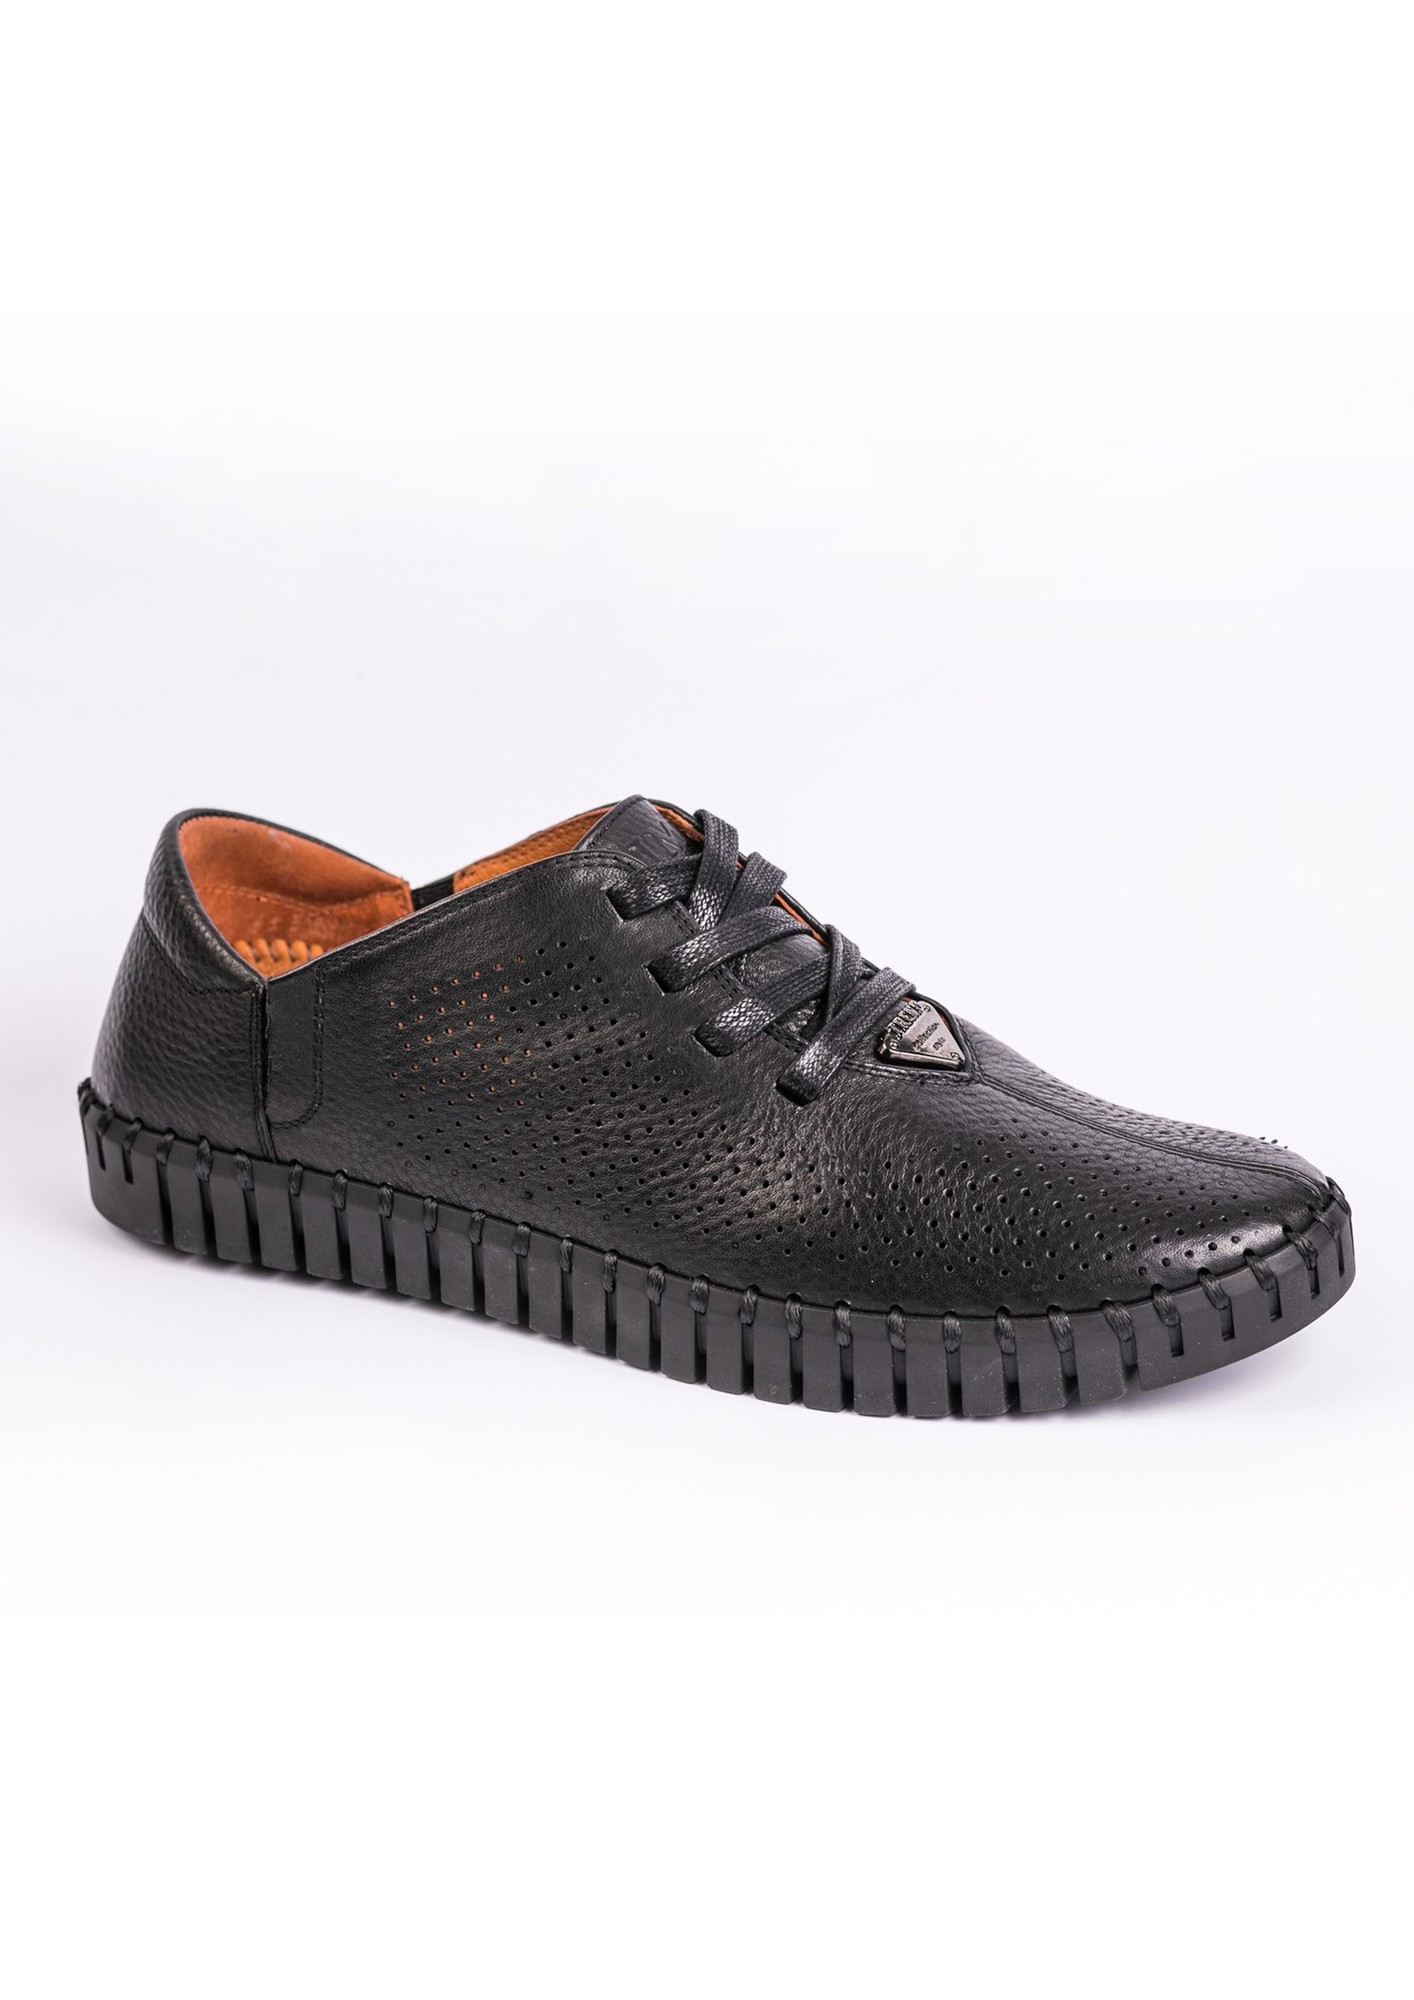 Soft and stylish men's moccasins made of genuine leather. Choose shoes "PS L 27"